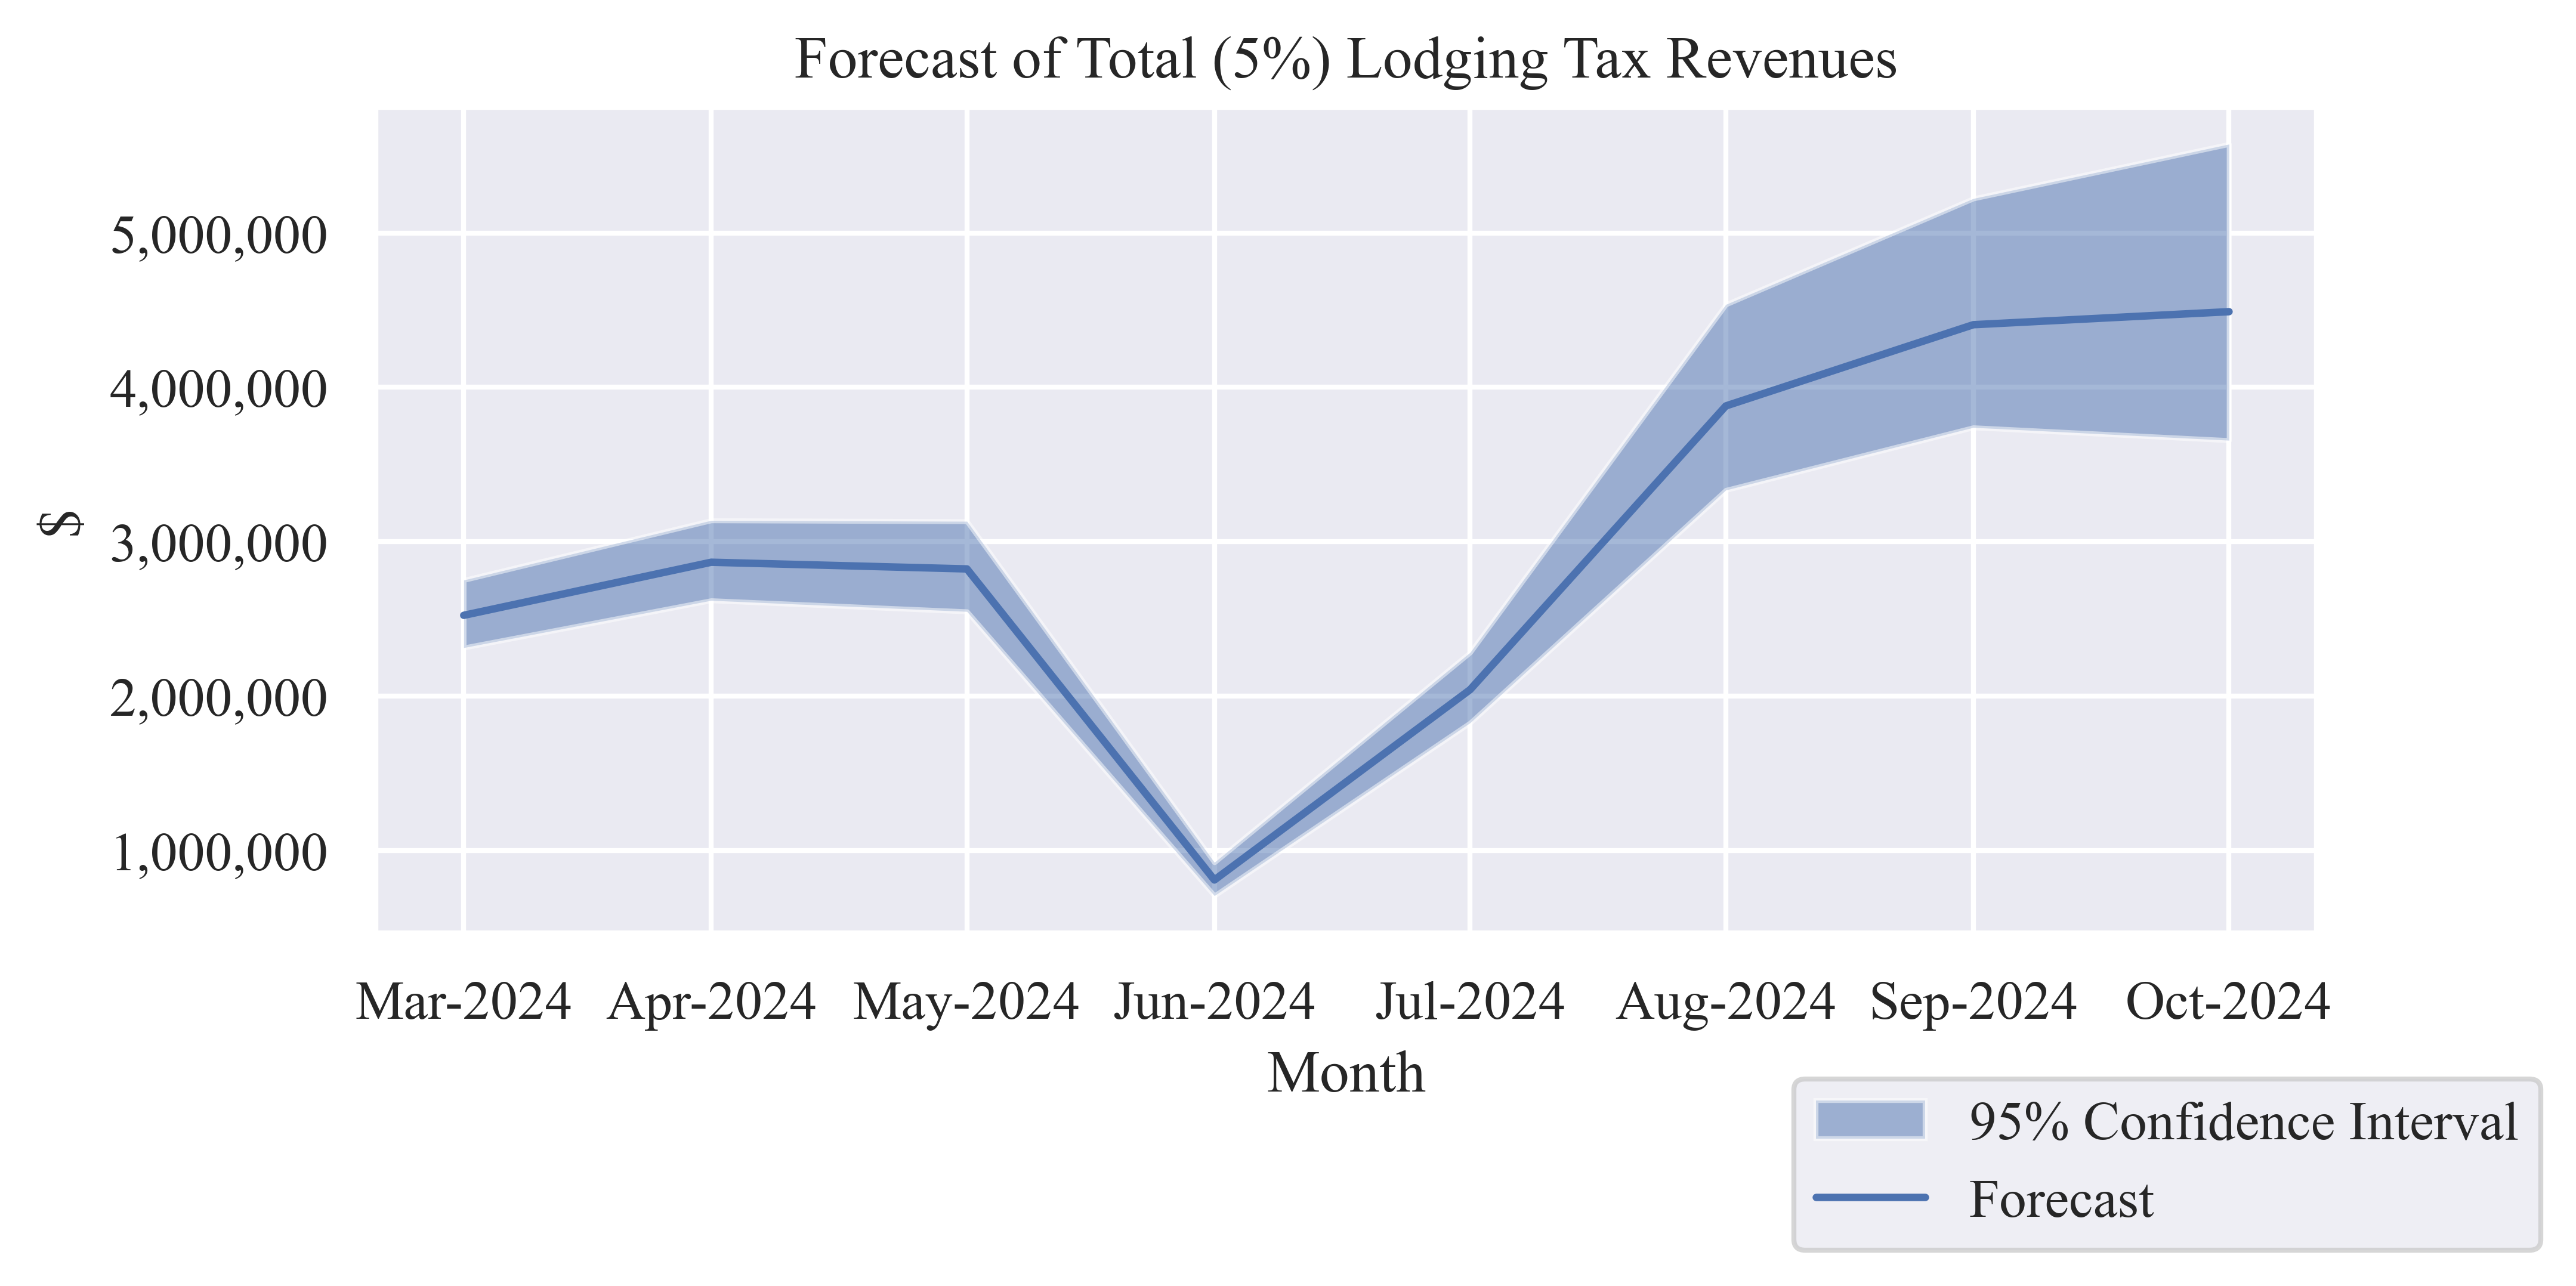 Table 6: Forecast of Monthly Total (5%) Lodging Tax Revenue